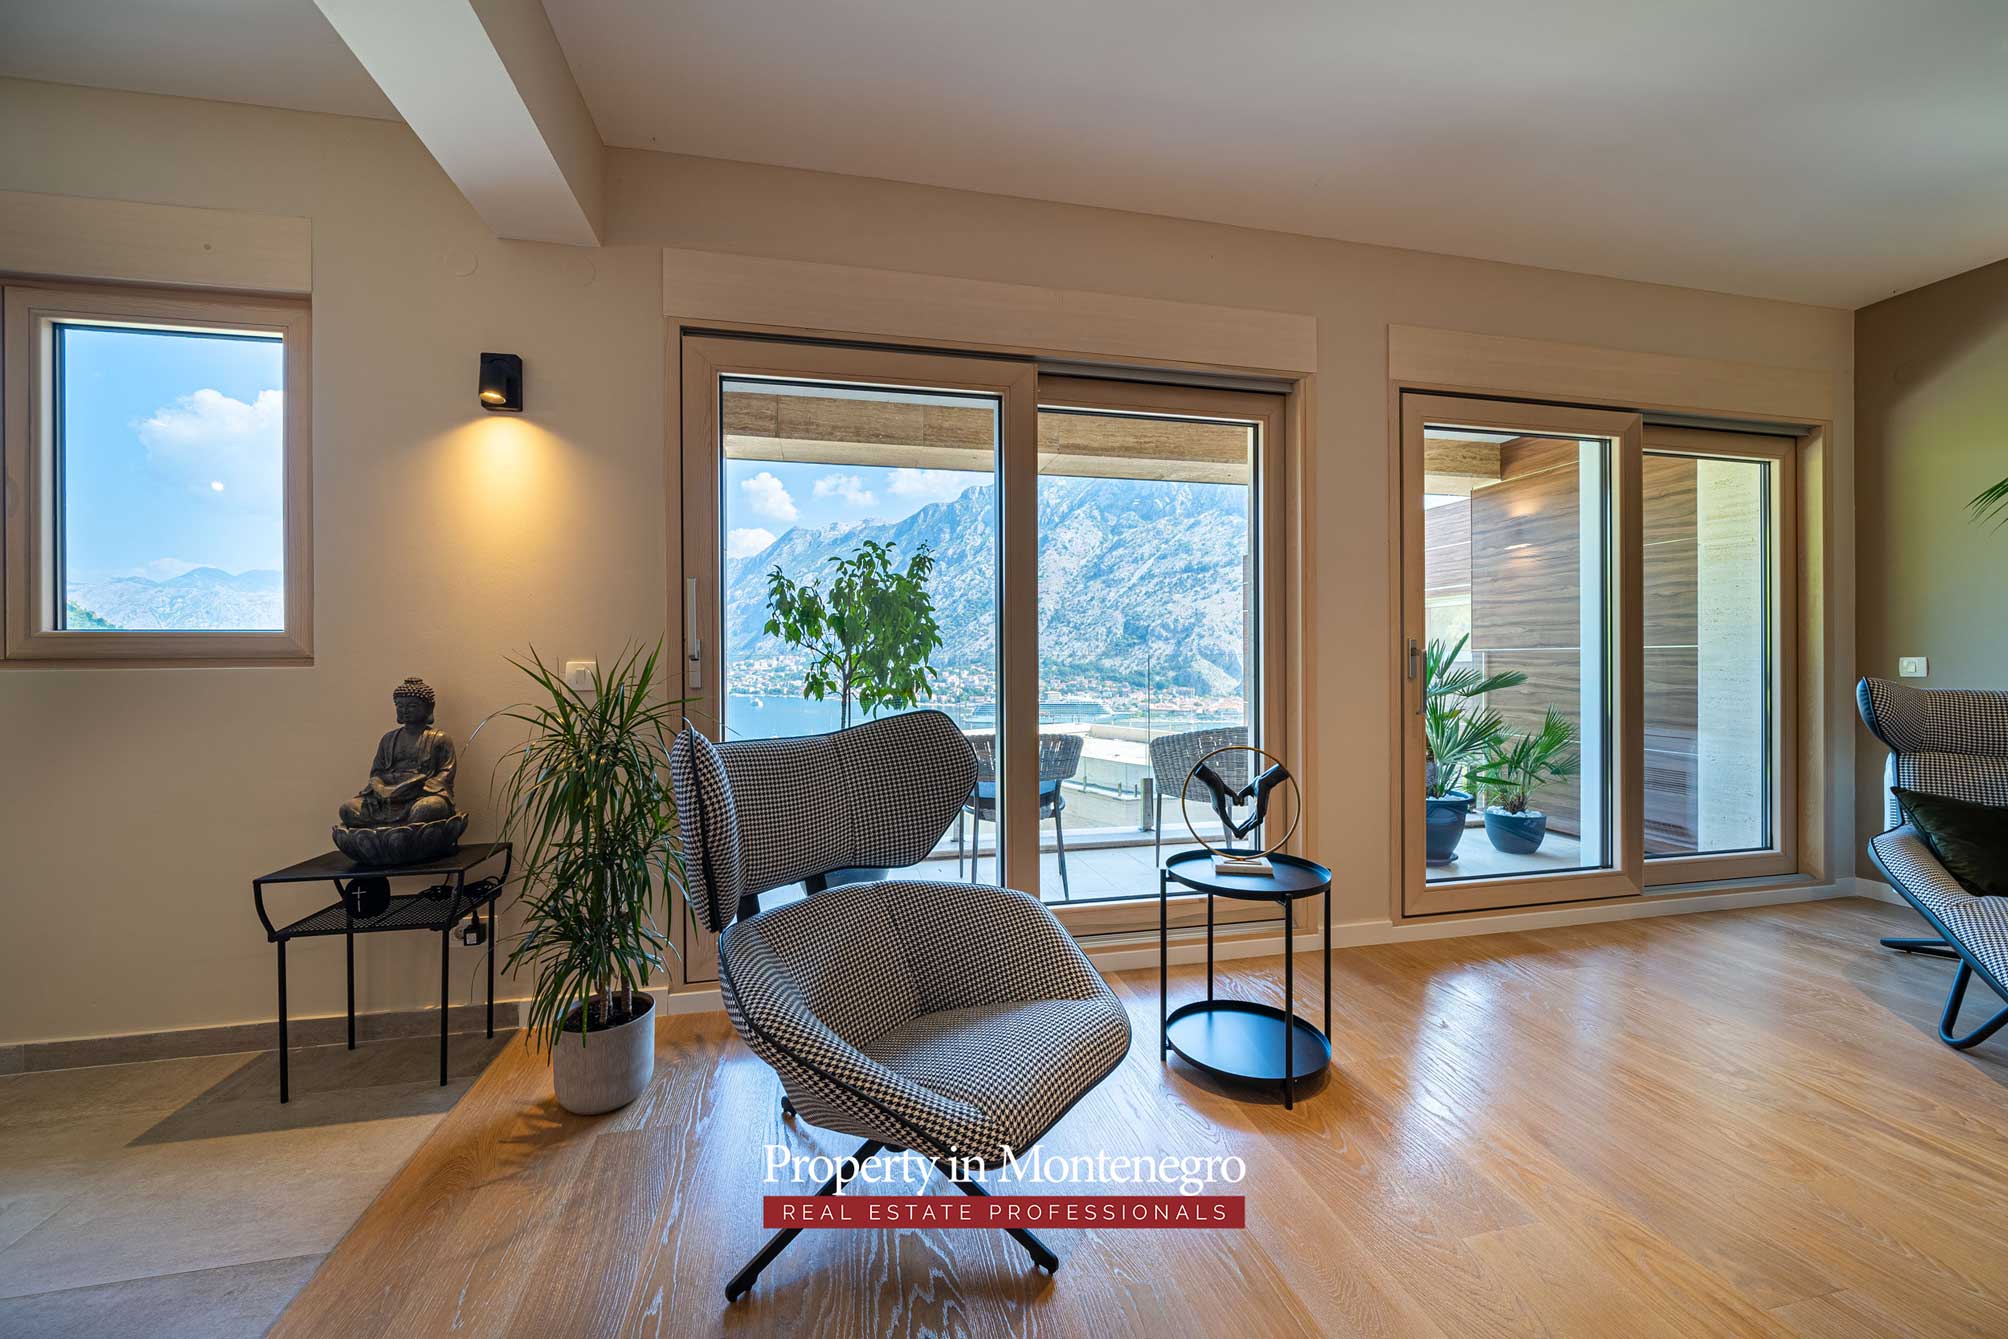 One bedroom apartment for sale in Bay of Kotor